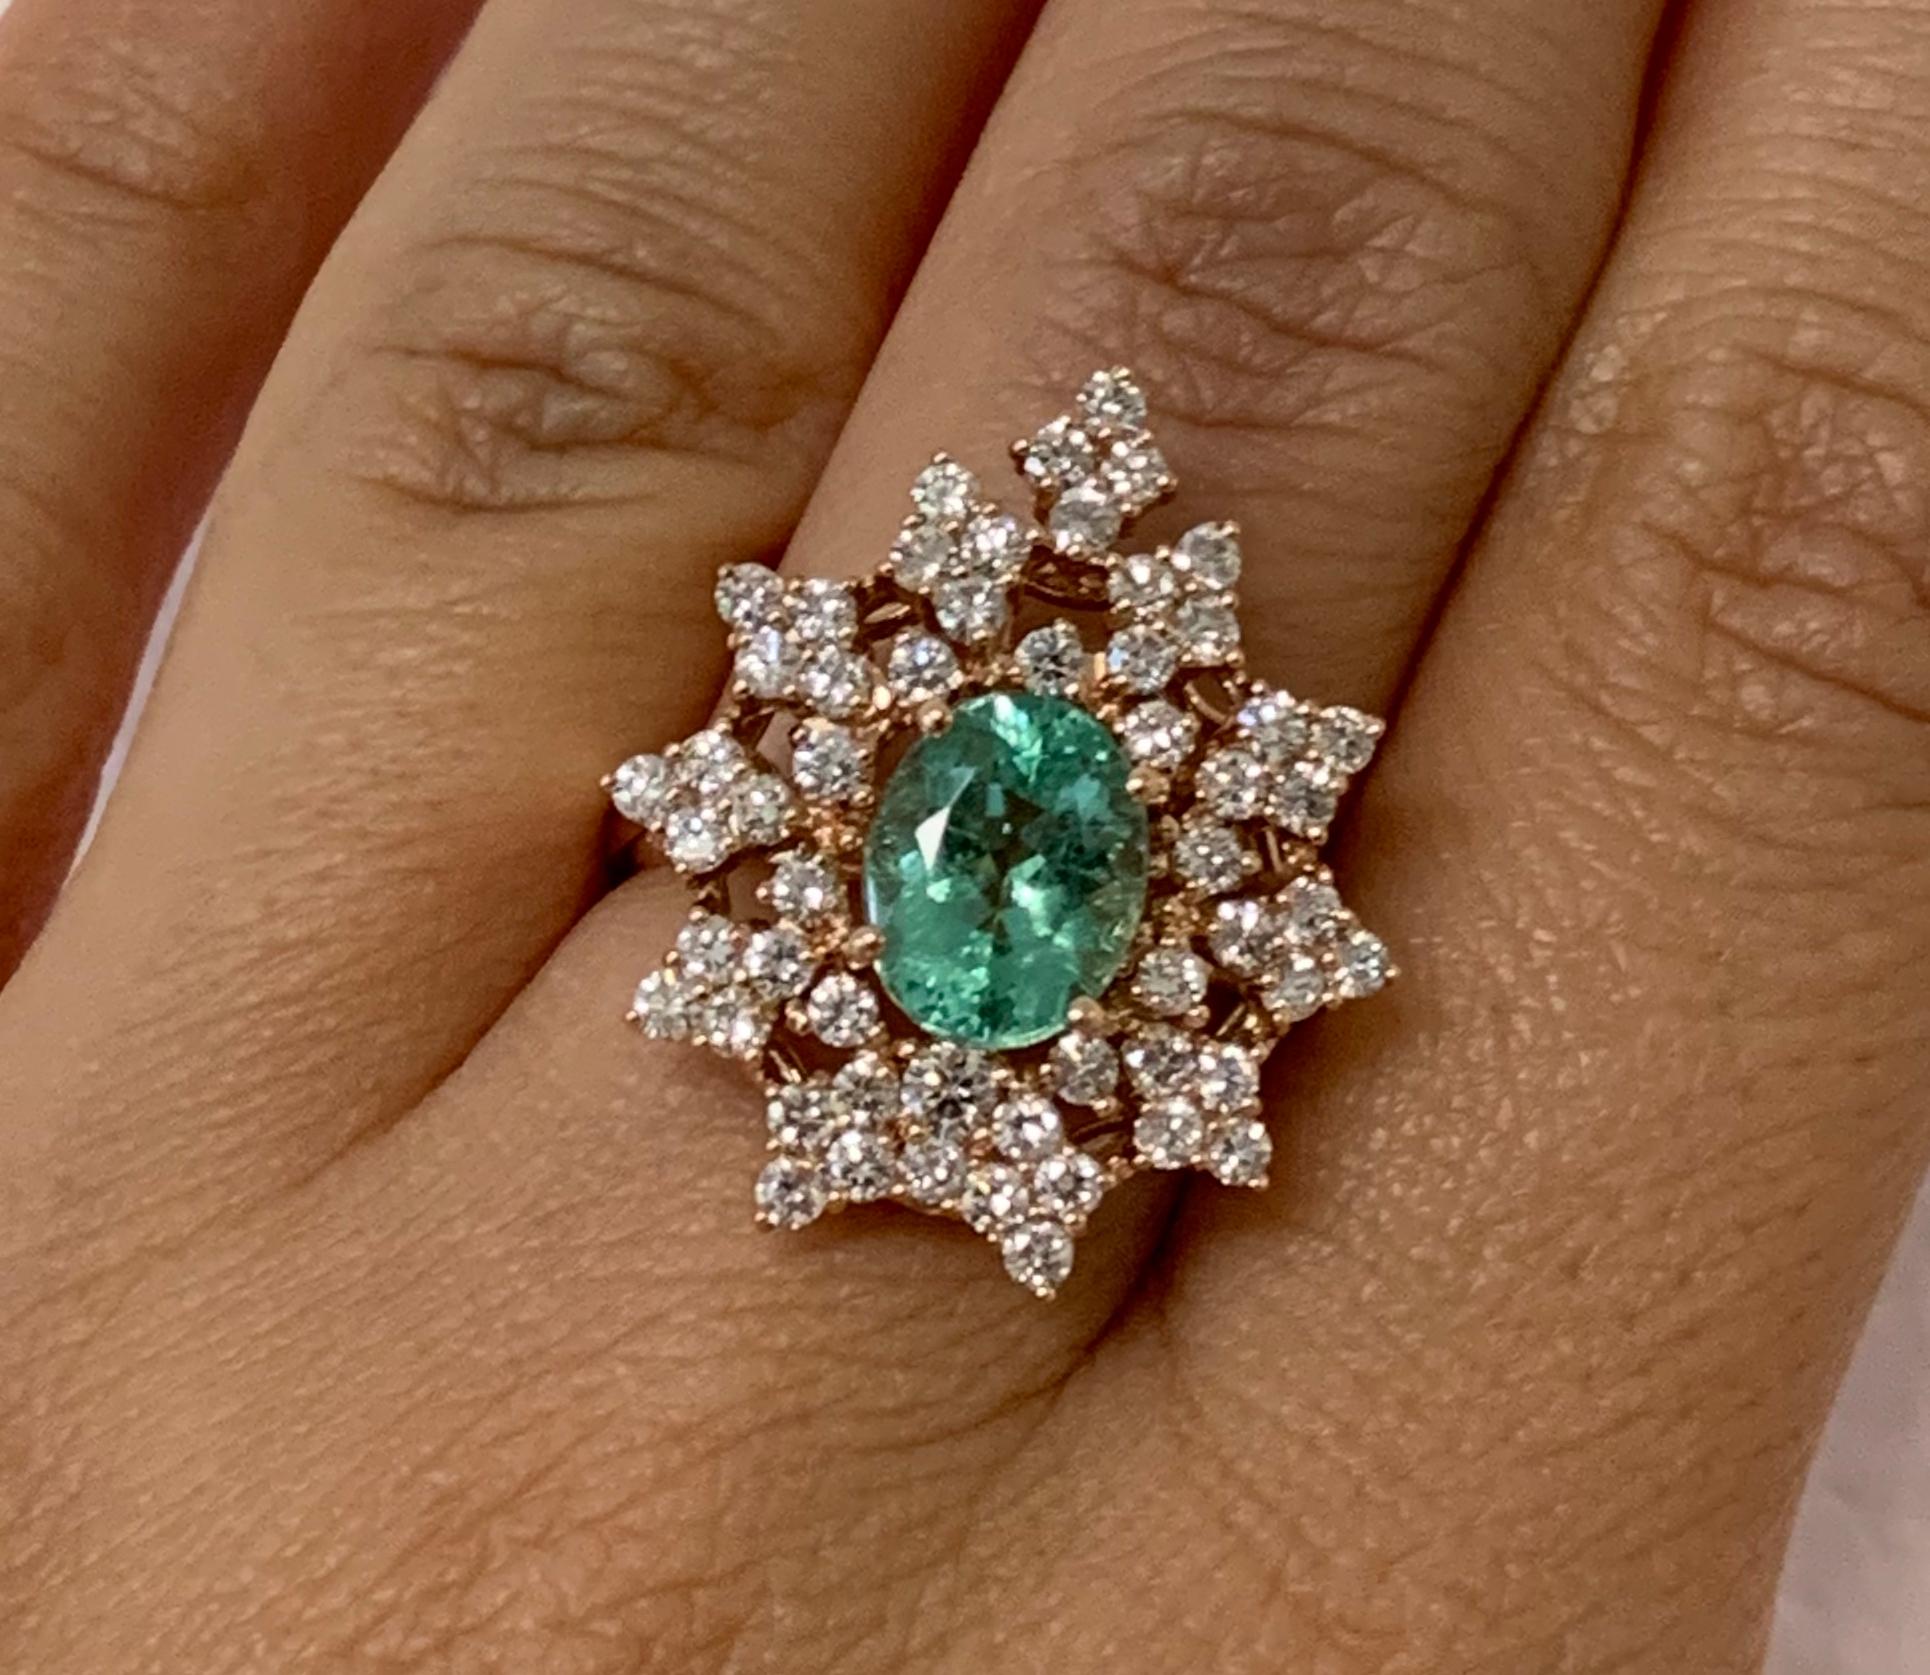 Material: 14k Rose Gold 

Center Stone Details: 1.85 Carat Oval Shaped Paraiba Tourmaline -Measuring 8.8 x 6.9 mm
Diamond Details: 55 Brilliant Round White Diamonds at Approximately 1.2 Carats - Clarity: SI / Color: H-I
Ring Size: 6.75.